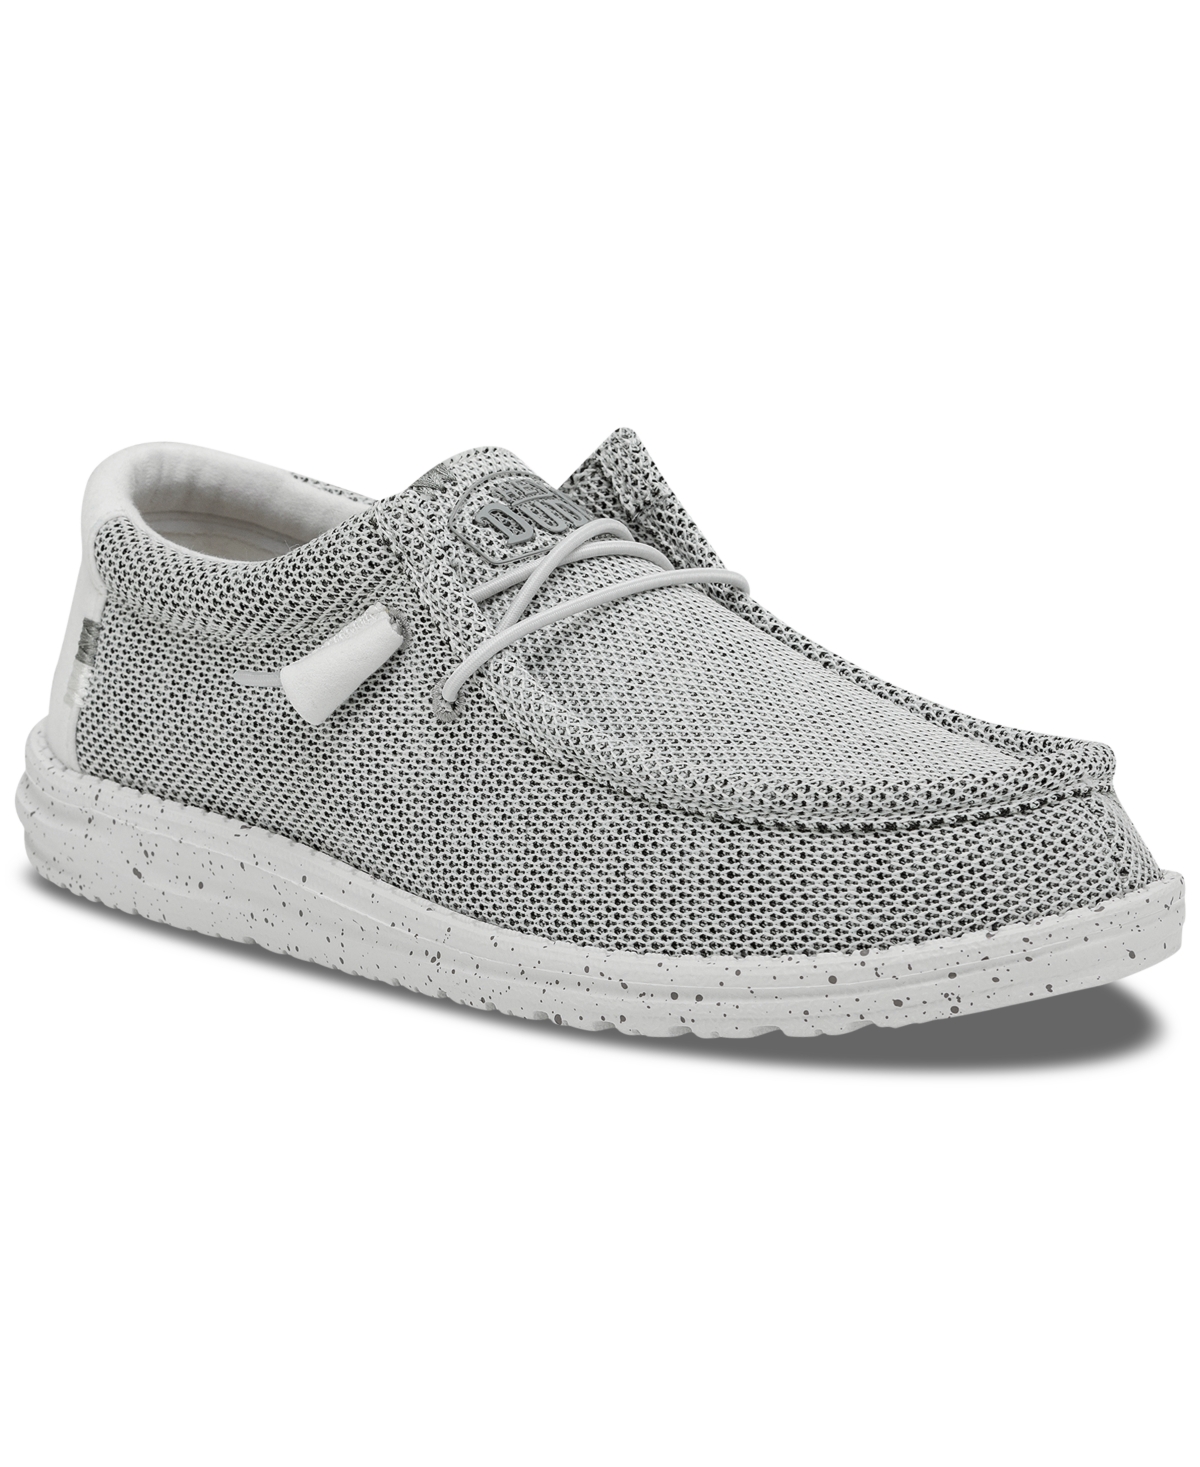 Shop Hey Dude Men's Wally Sox Slip-on Casual Moccasin Sneakers From Finish Line In Stone White